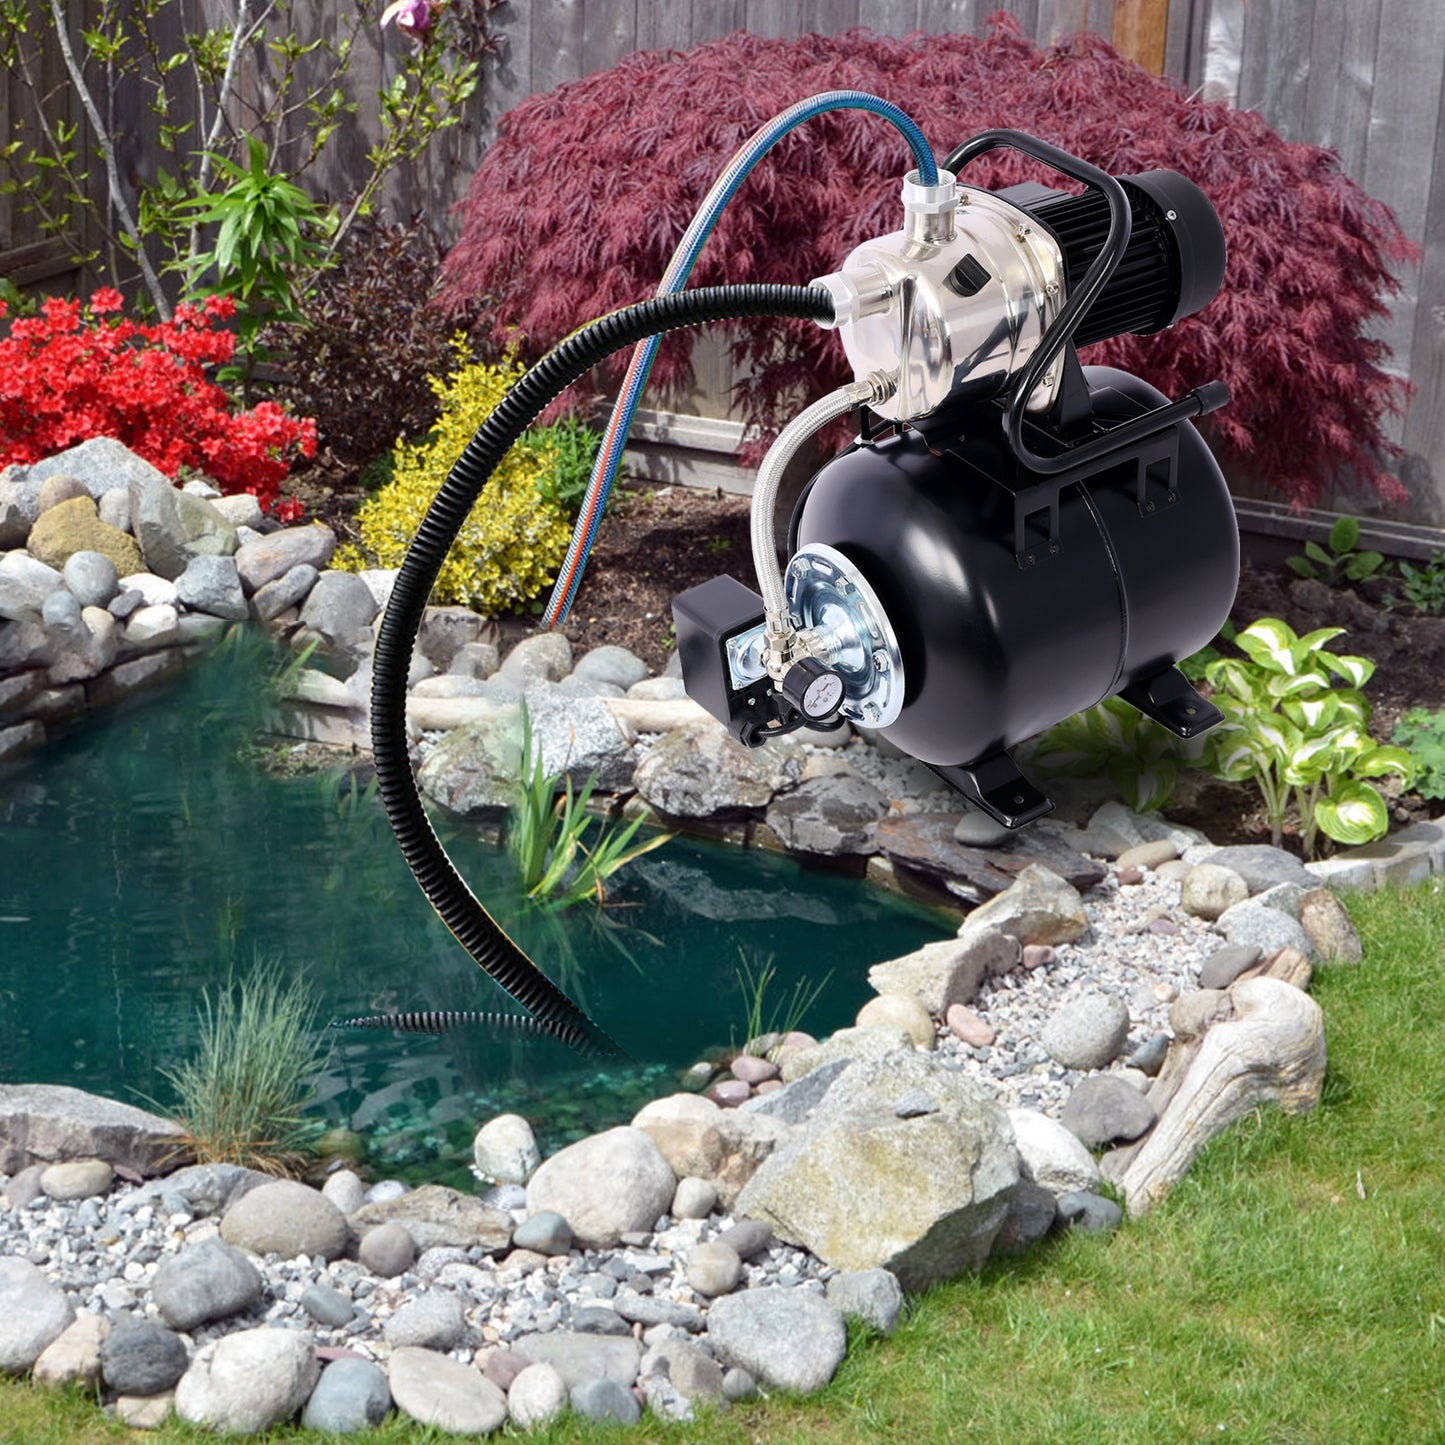 1.6HP Shallow Well Pump with Pressure Tank,garden water pump, Irrigation Pump,Automatic Water Booster Pump for Home Garden Lawn Farm，stainless steel head